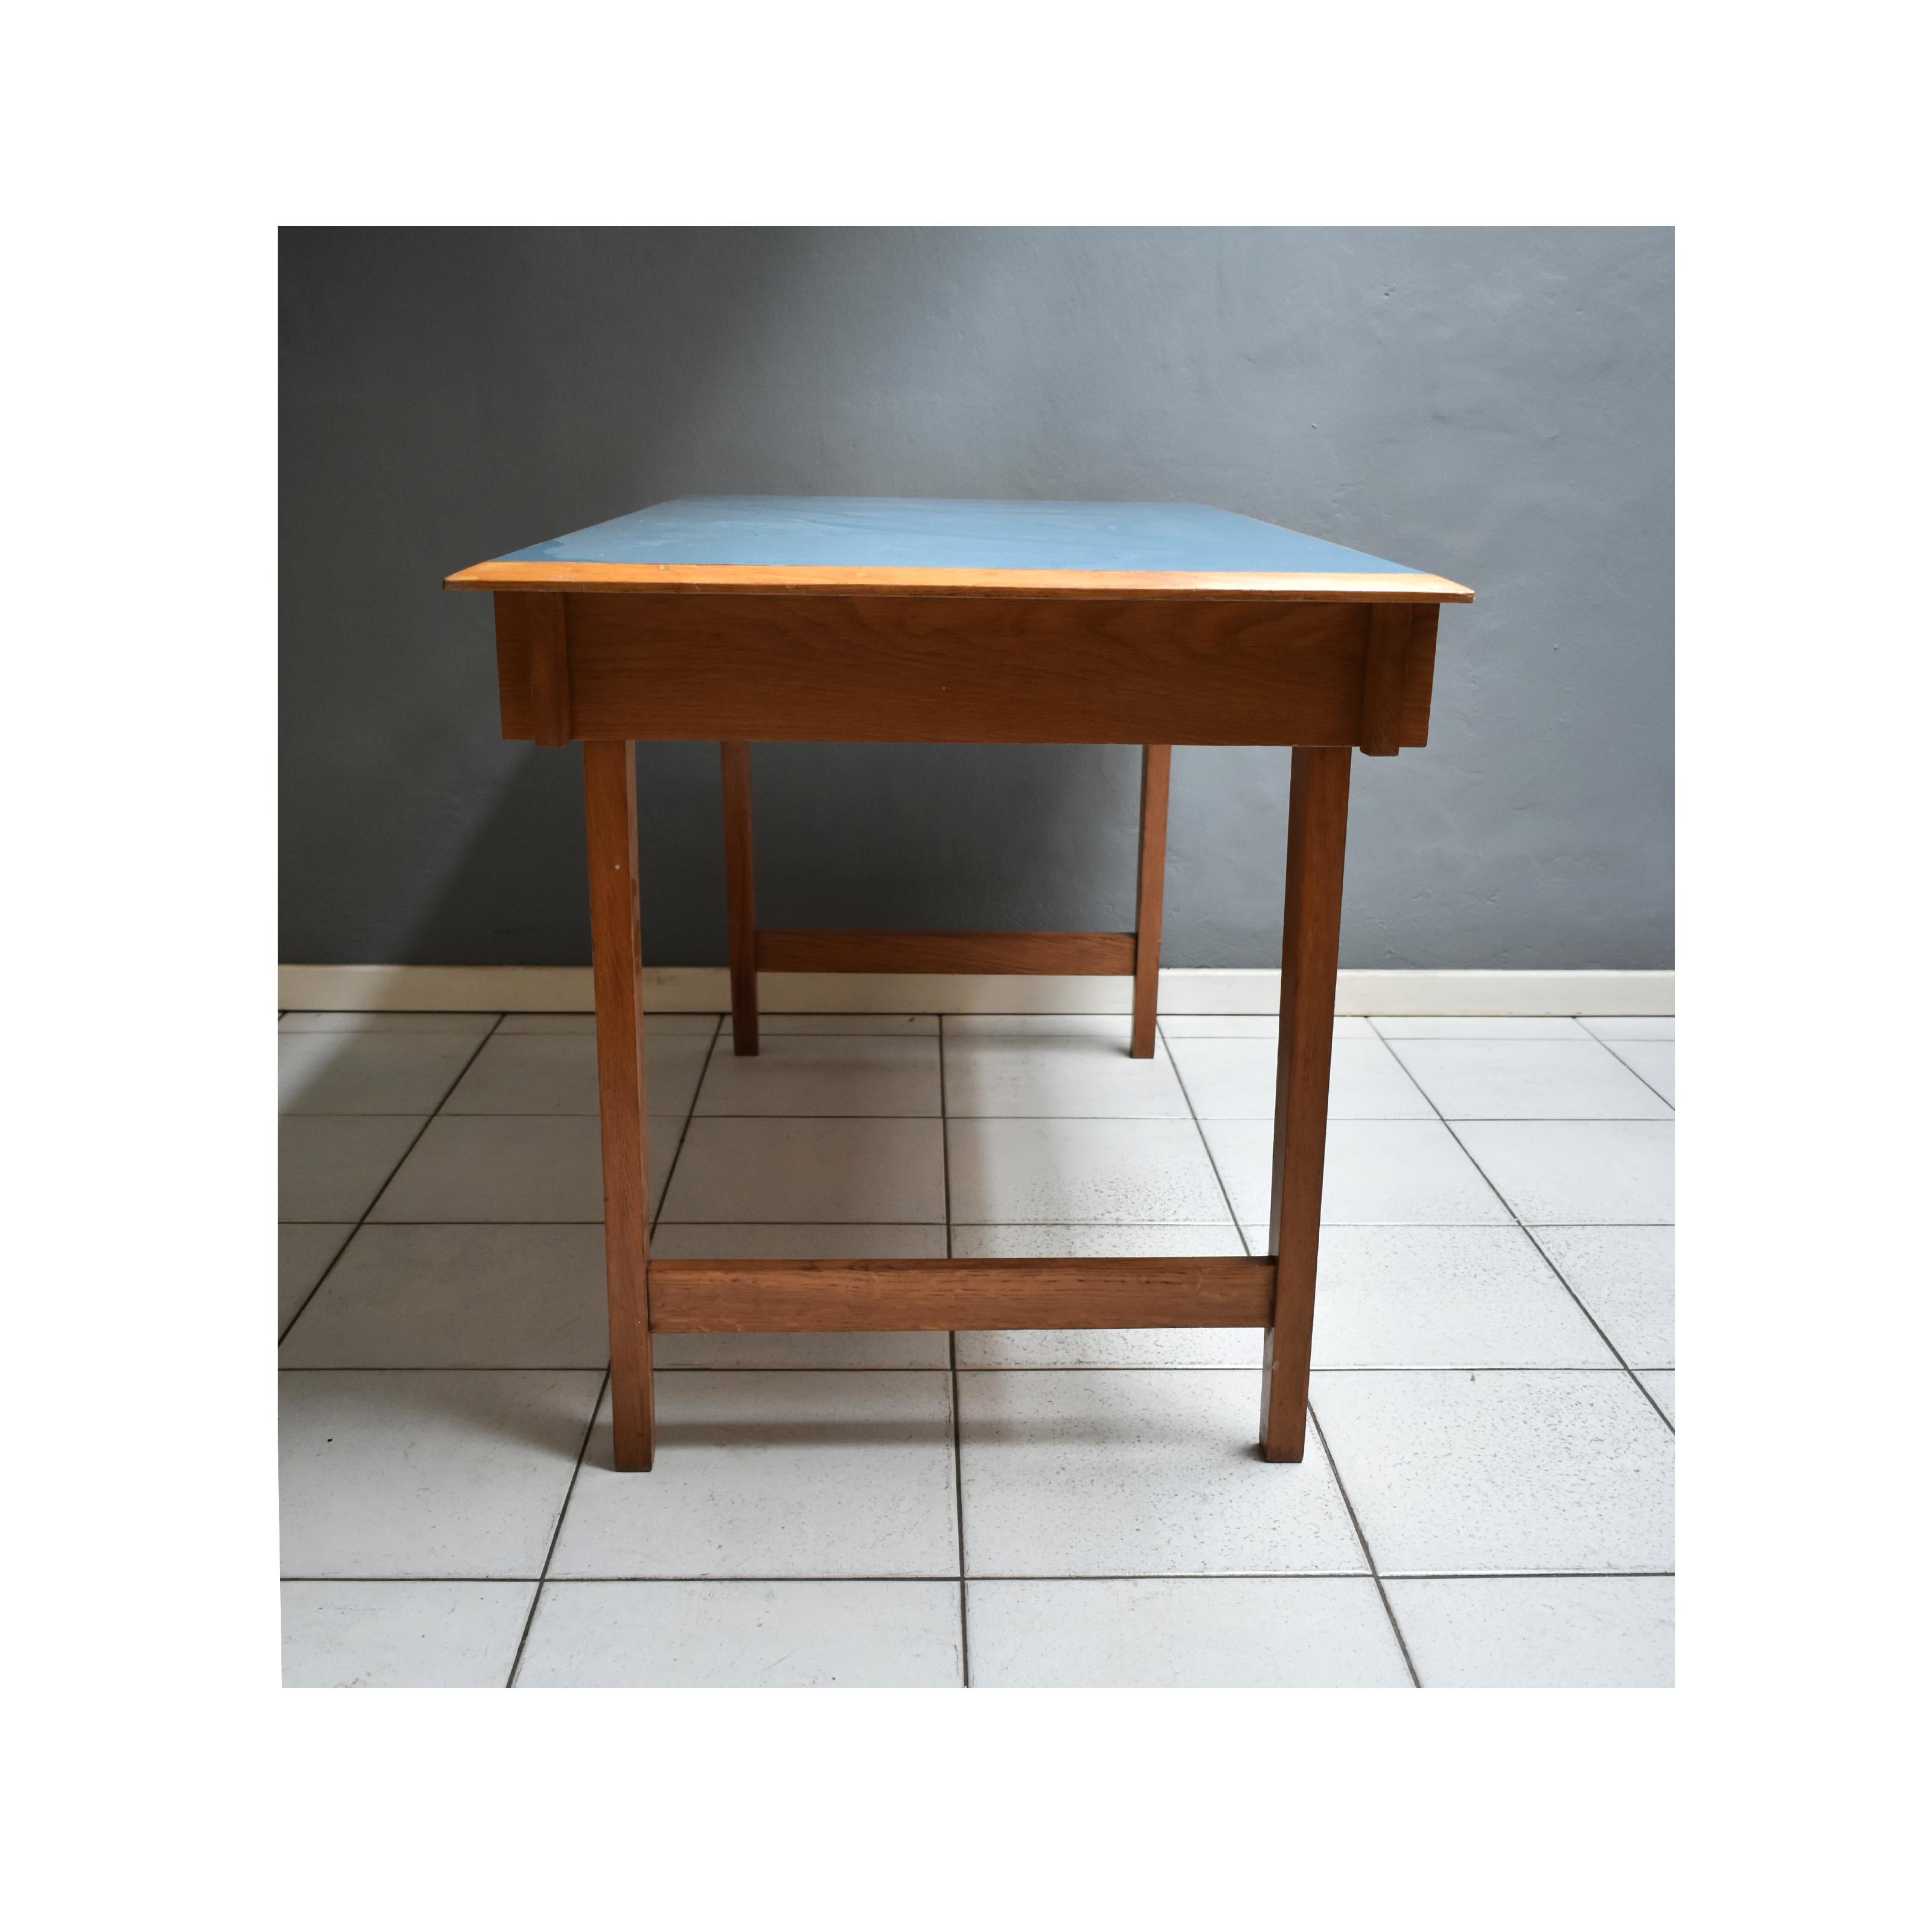 Mid-Century Modern  Italian Manufacture, 1960 writing desk in Wood and Light Blue Formica Top